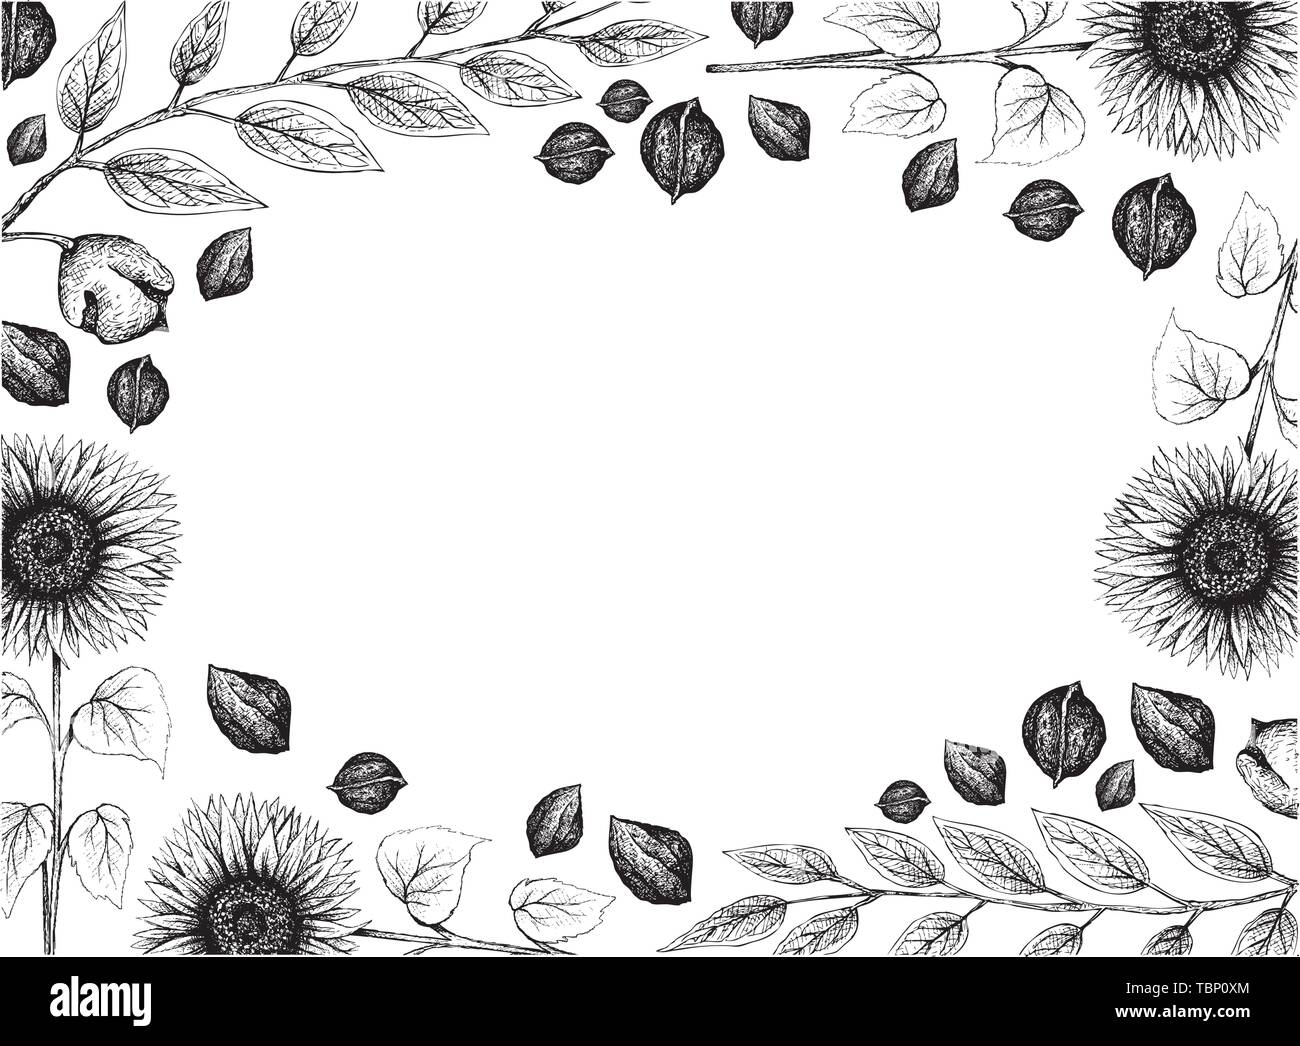 Illustration Frame fof Hand Drawn Sketch of Sunflowers and Black Walnuts or Juglans Nigra on White Background. Stock Vector